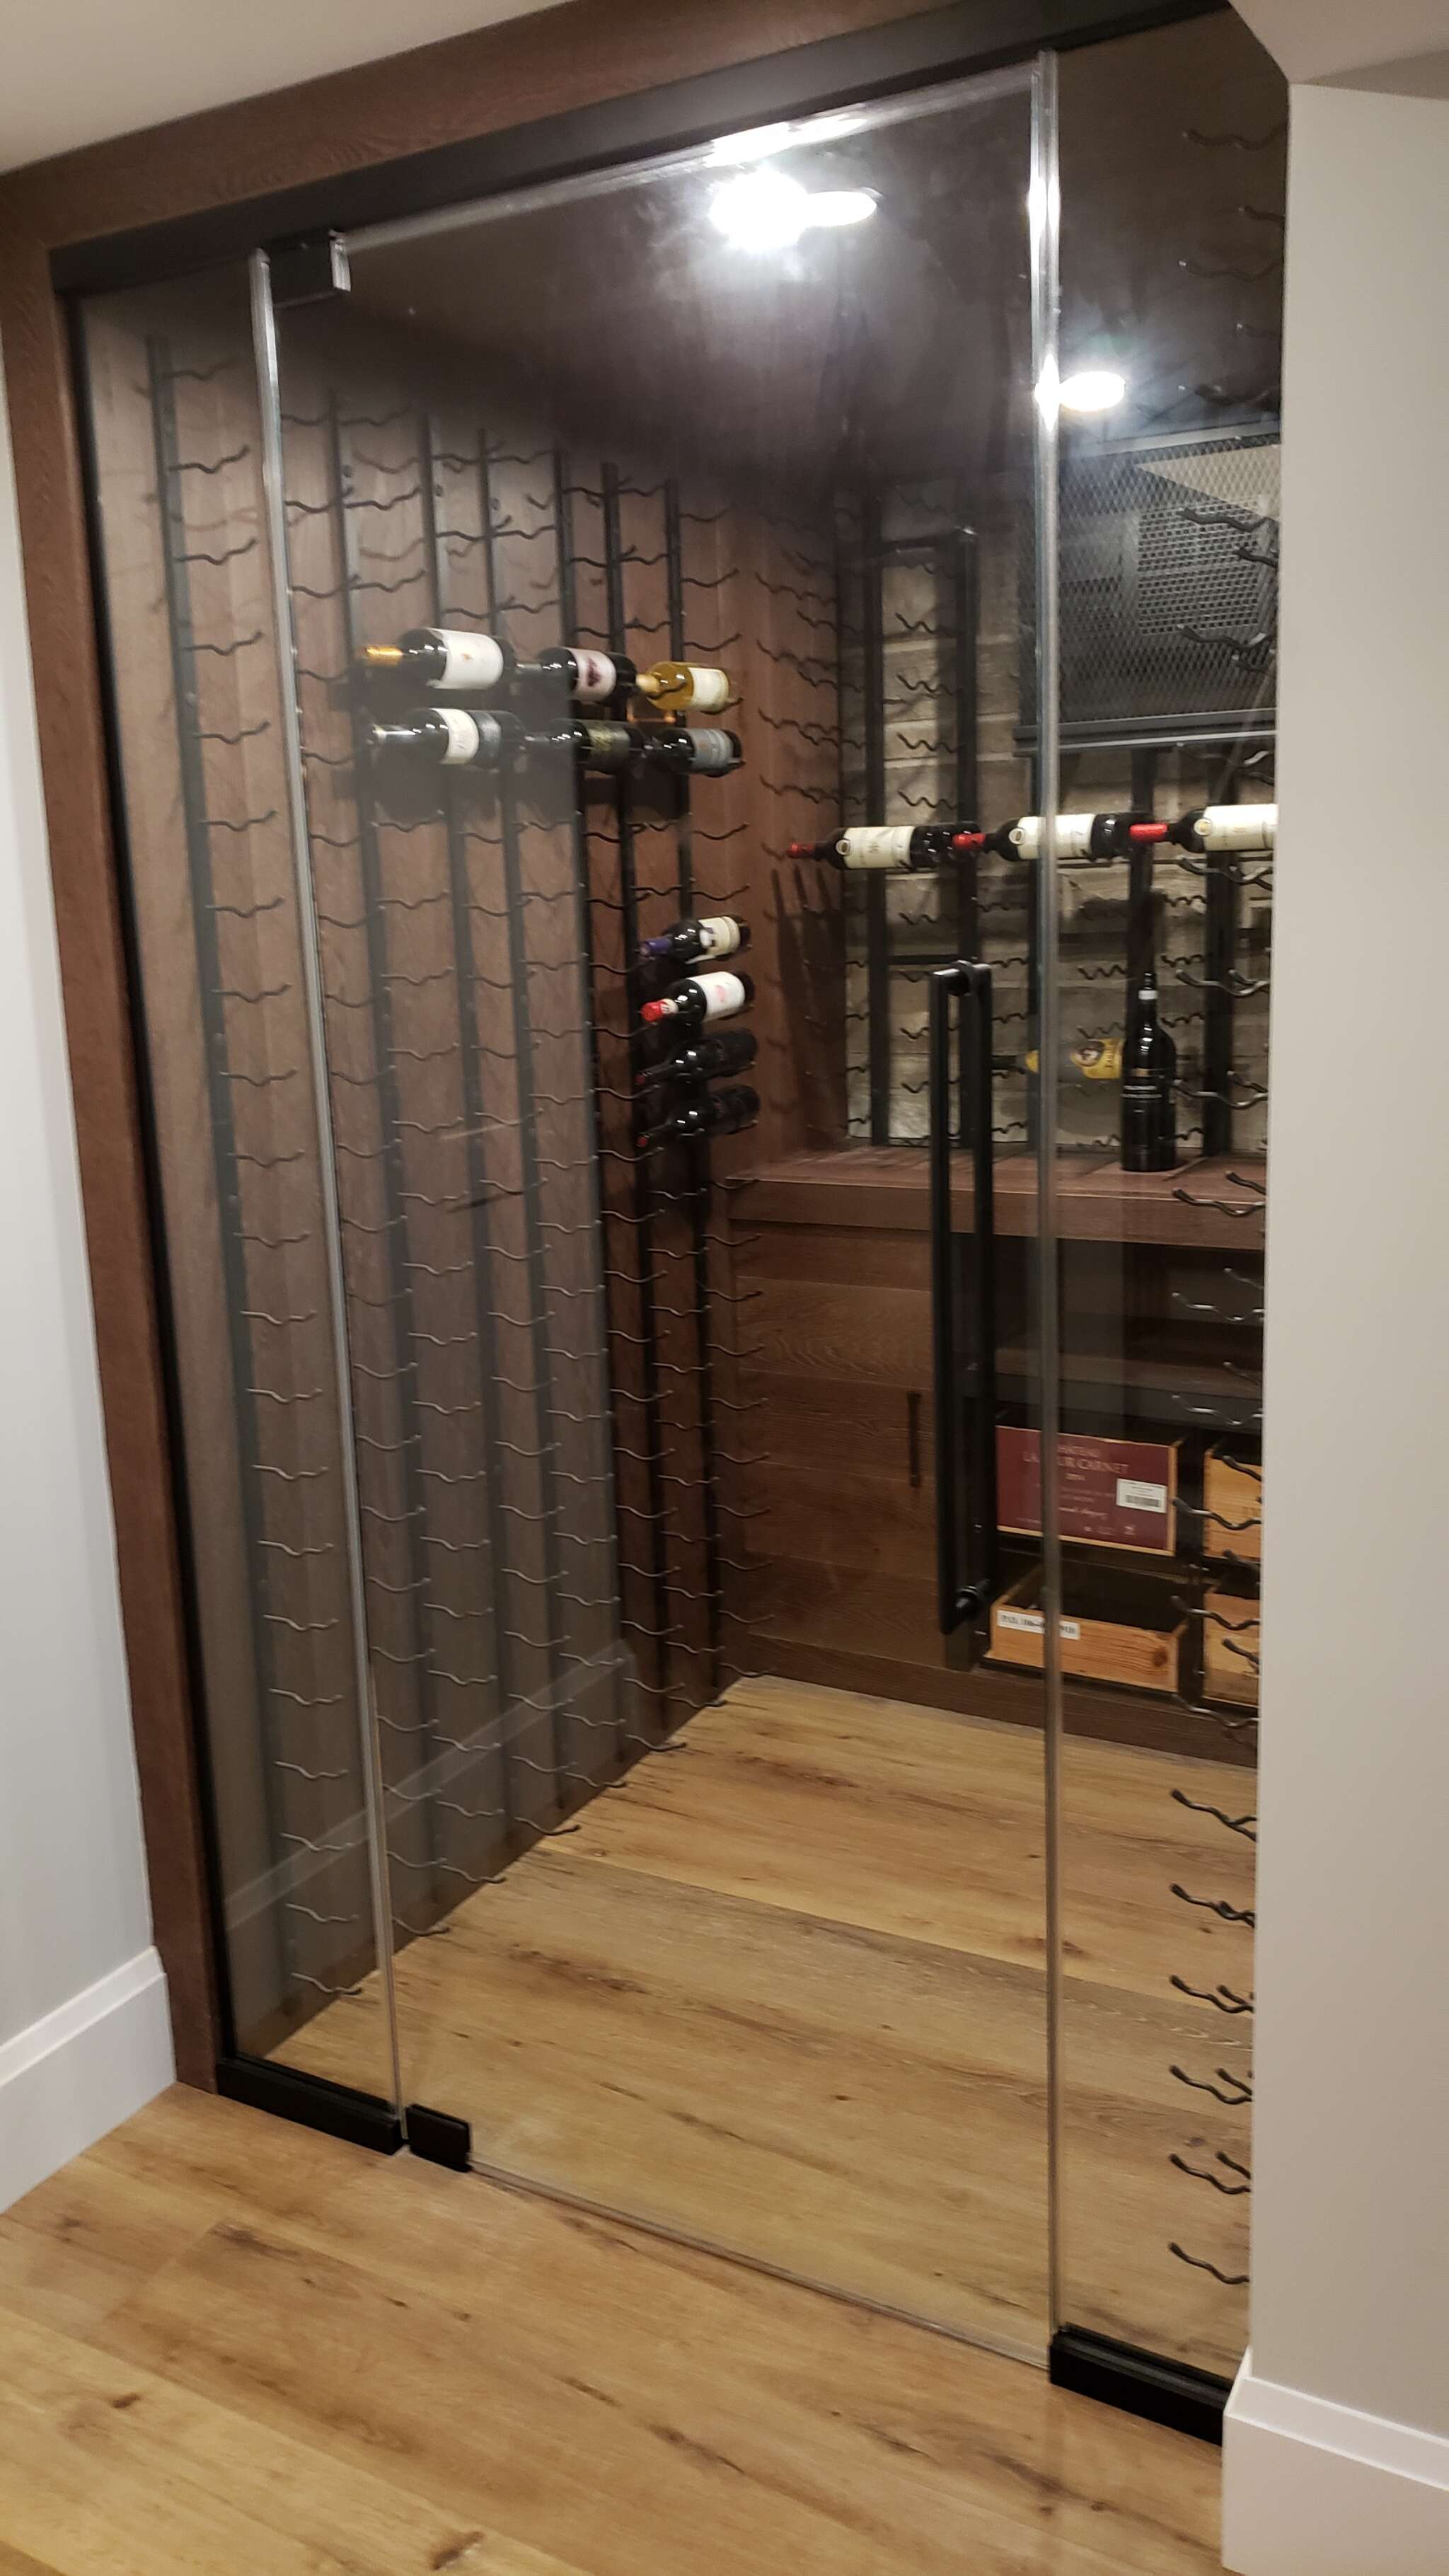 Featuring VV racking, hidden access panel and cooling system